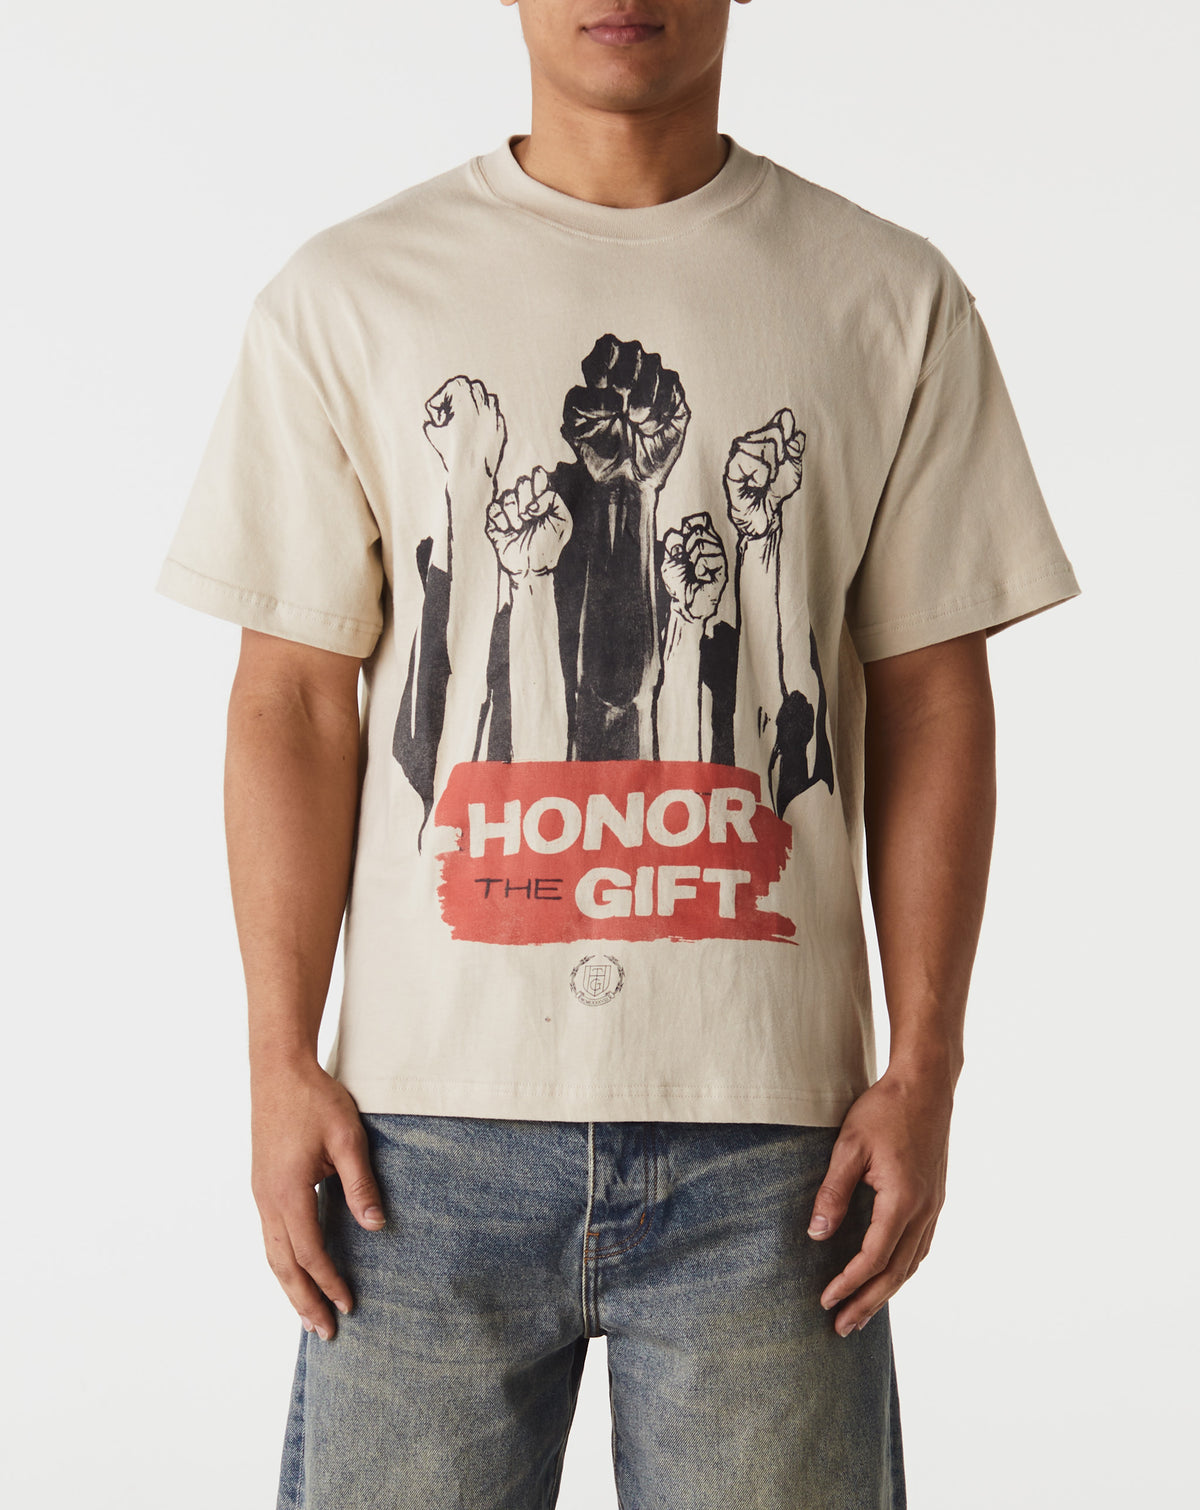 Honor The Gift Dignity T-Shirt - Rule of Next Apparel